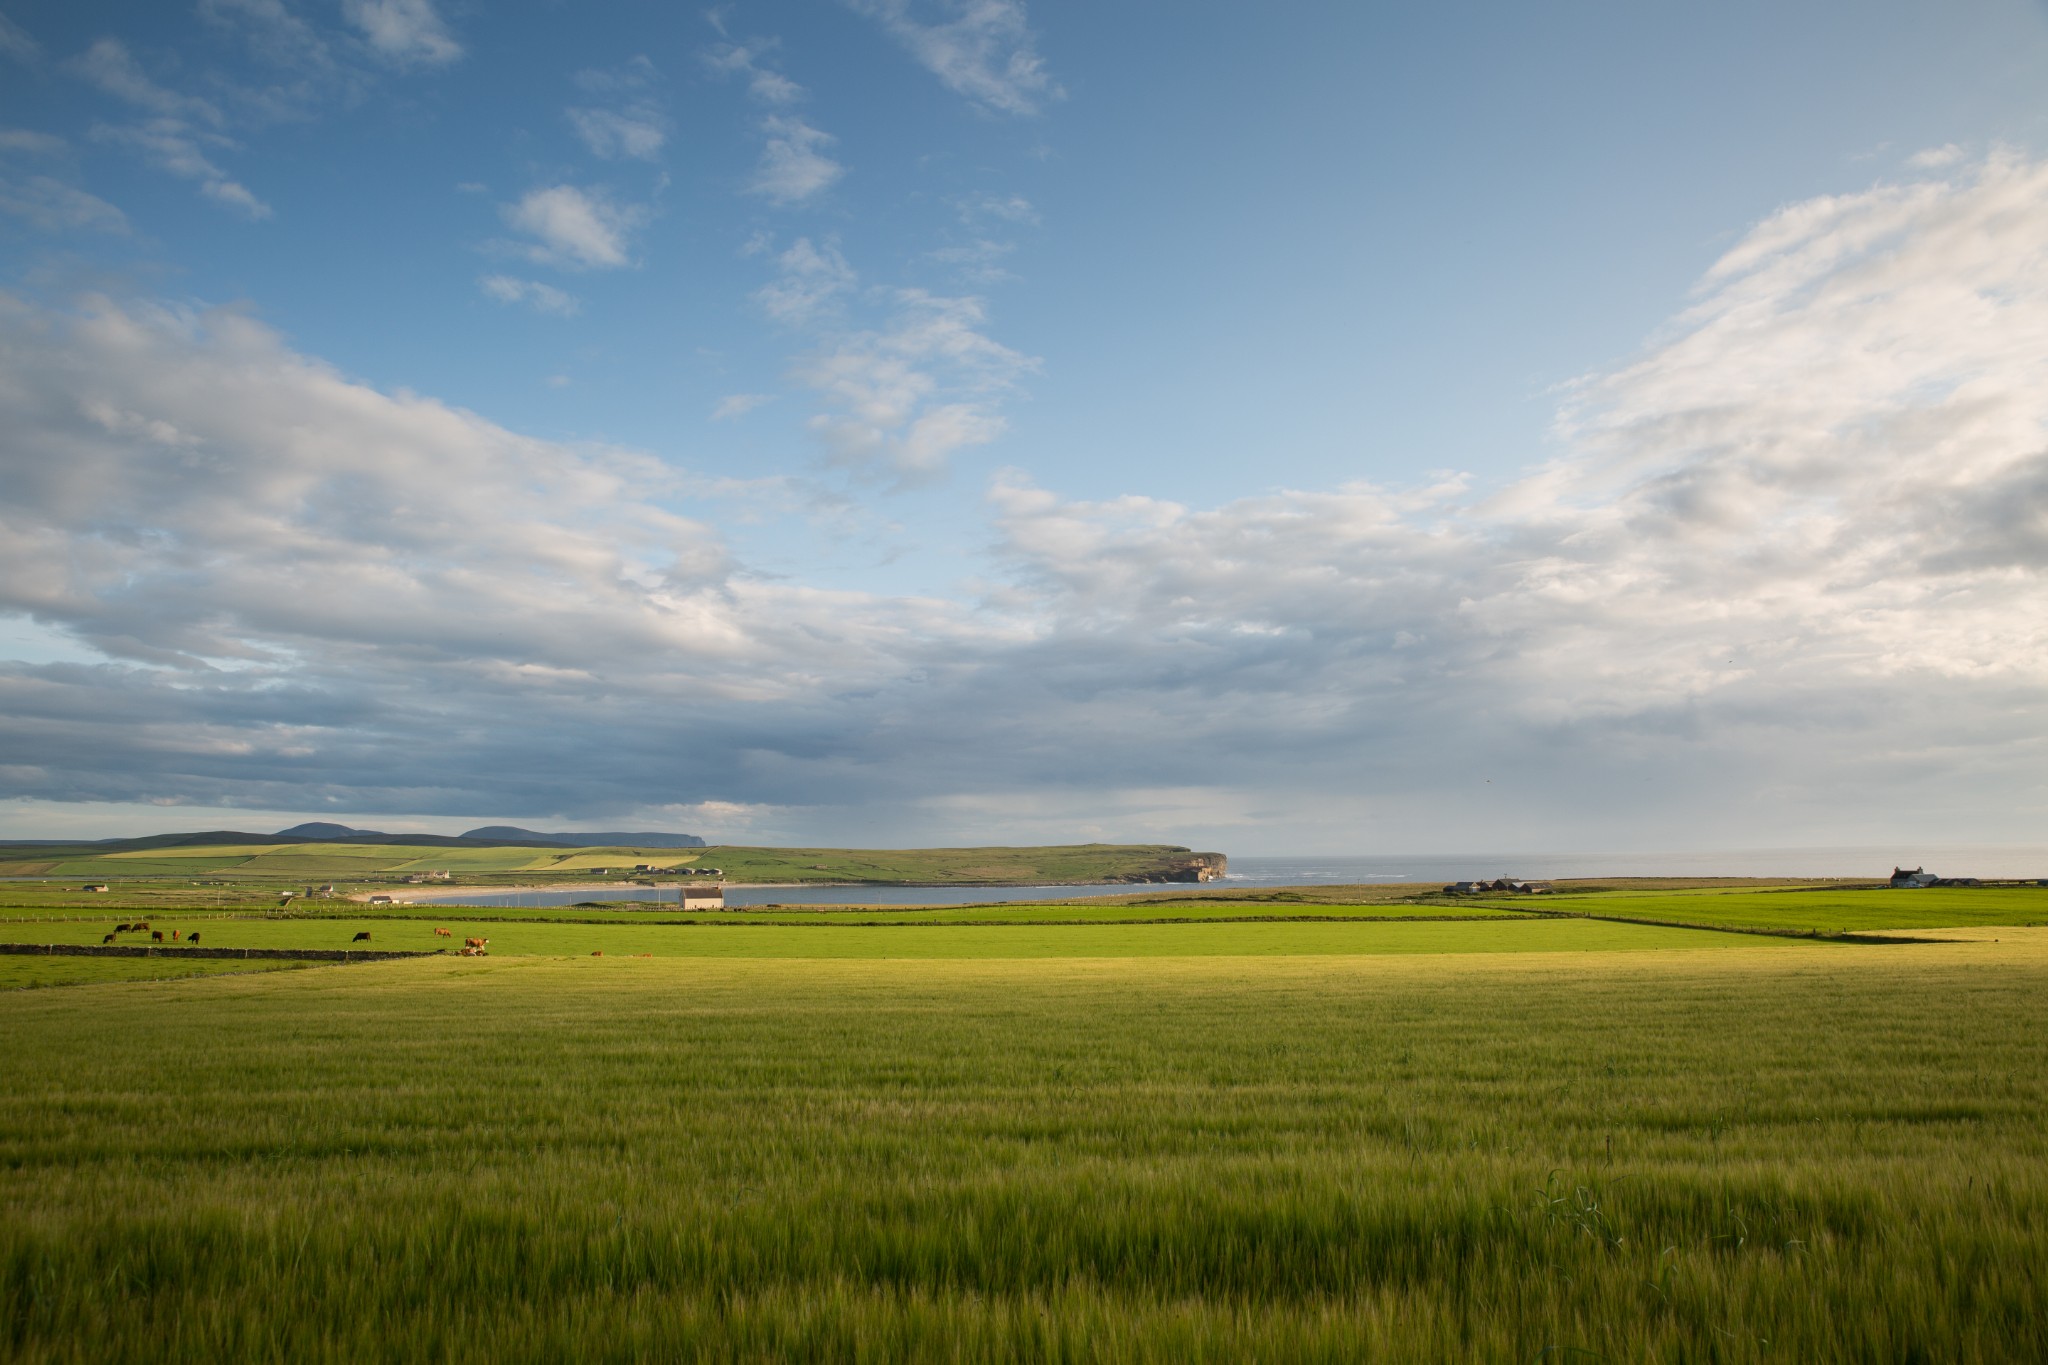 Orkney's fertile landscape will be part of the focus of this year's festival